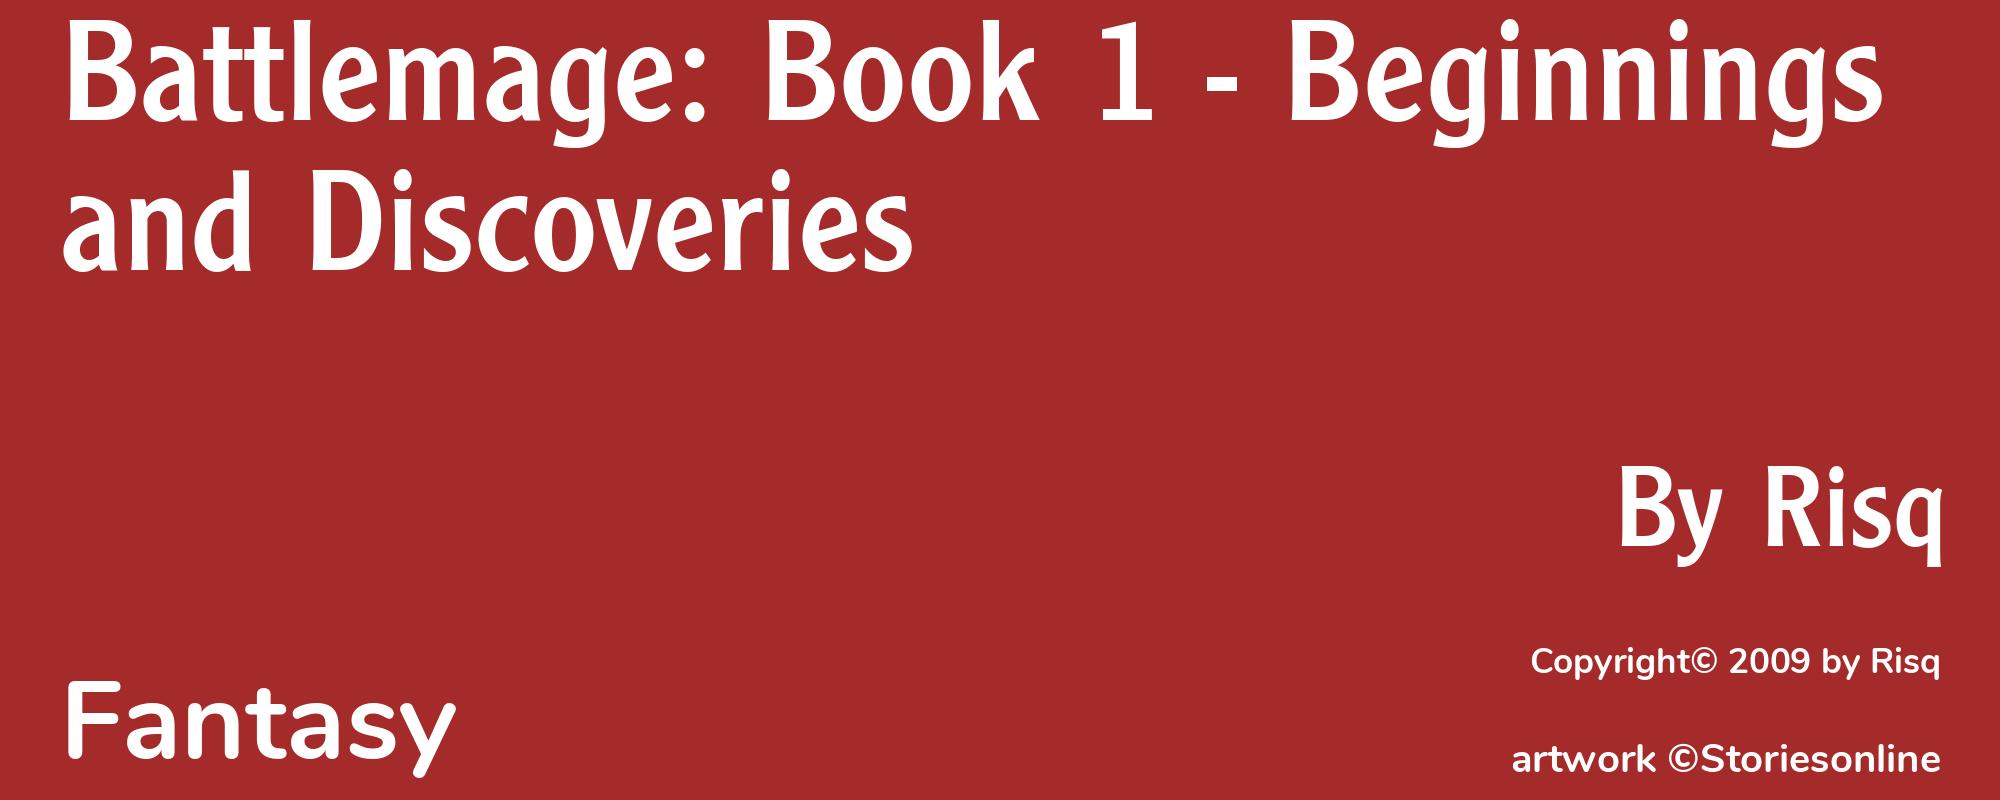 Battlemage: Book 1 - Beginnings and Discoveries - Cover